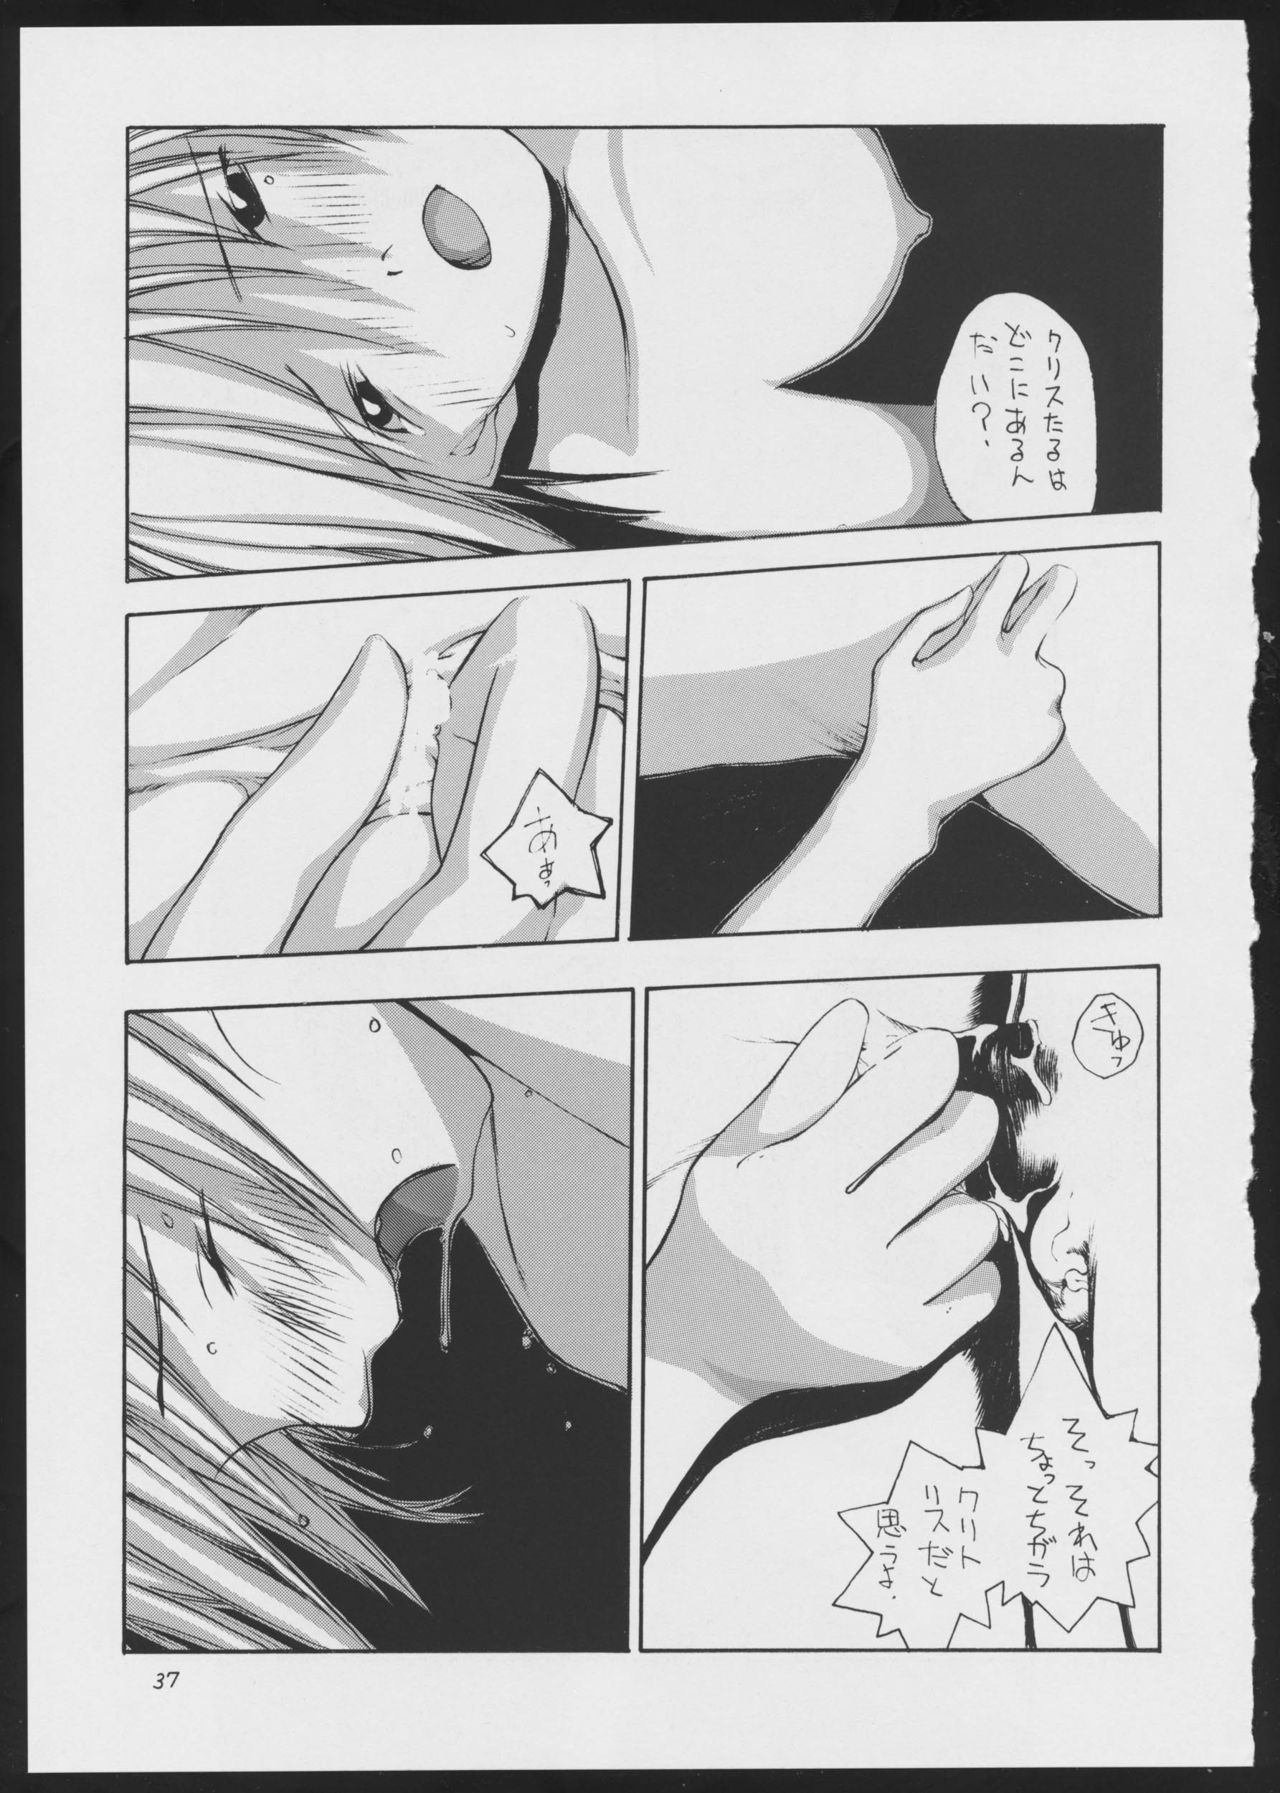 (C51) [Vachicalist (Various)] BLIND TOUCH (Various) page 37 full